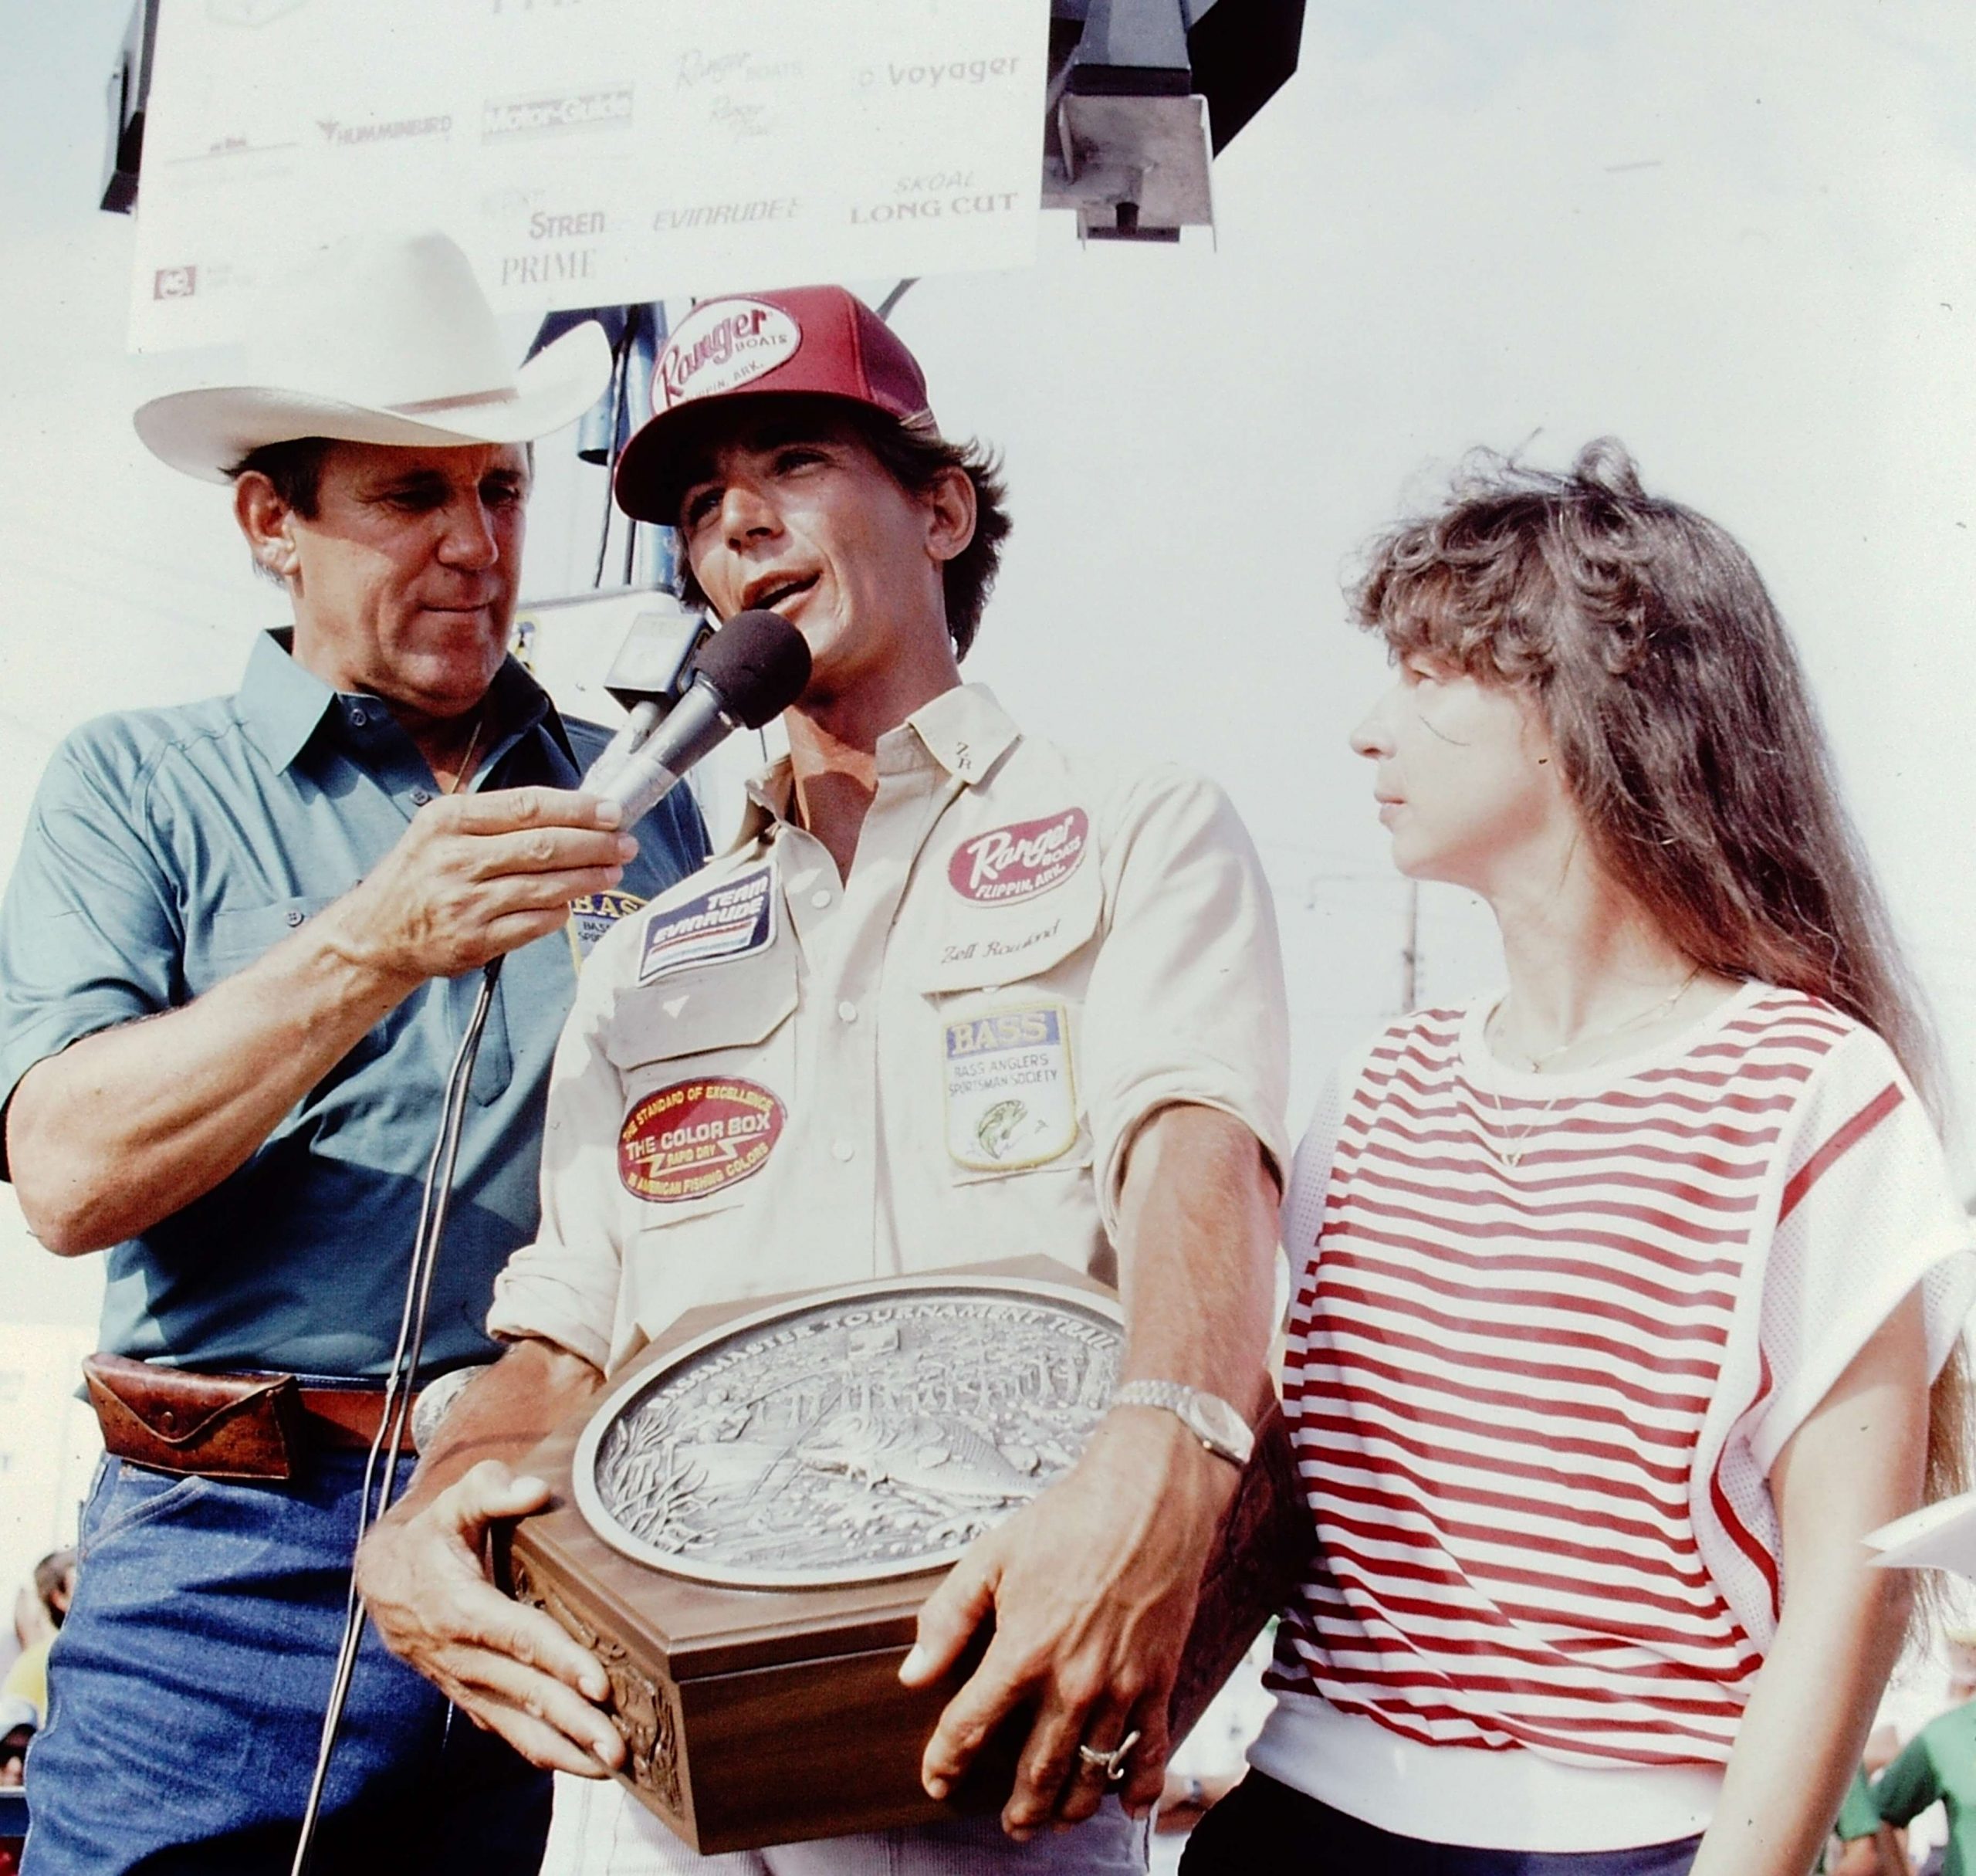 The next tournament on Chickamauga was a year later, June 4-7, 1986, the 1986 B.A.S.S. Super-Invitational. Zell Rowland took the win with 39 pounds, 6 ounces. The 29-year-old pro won by working a 2 1/2-inch Rebel Pop-R along the edges of milfoil in 8 to 10 feet of water. âWind was a key part of my pattern,â Rowland told late Bassmaster writer Tim Tucker. He added that the wind forced baitfish out of open water and against the edge of the grass.